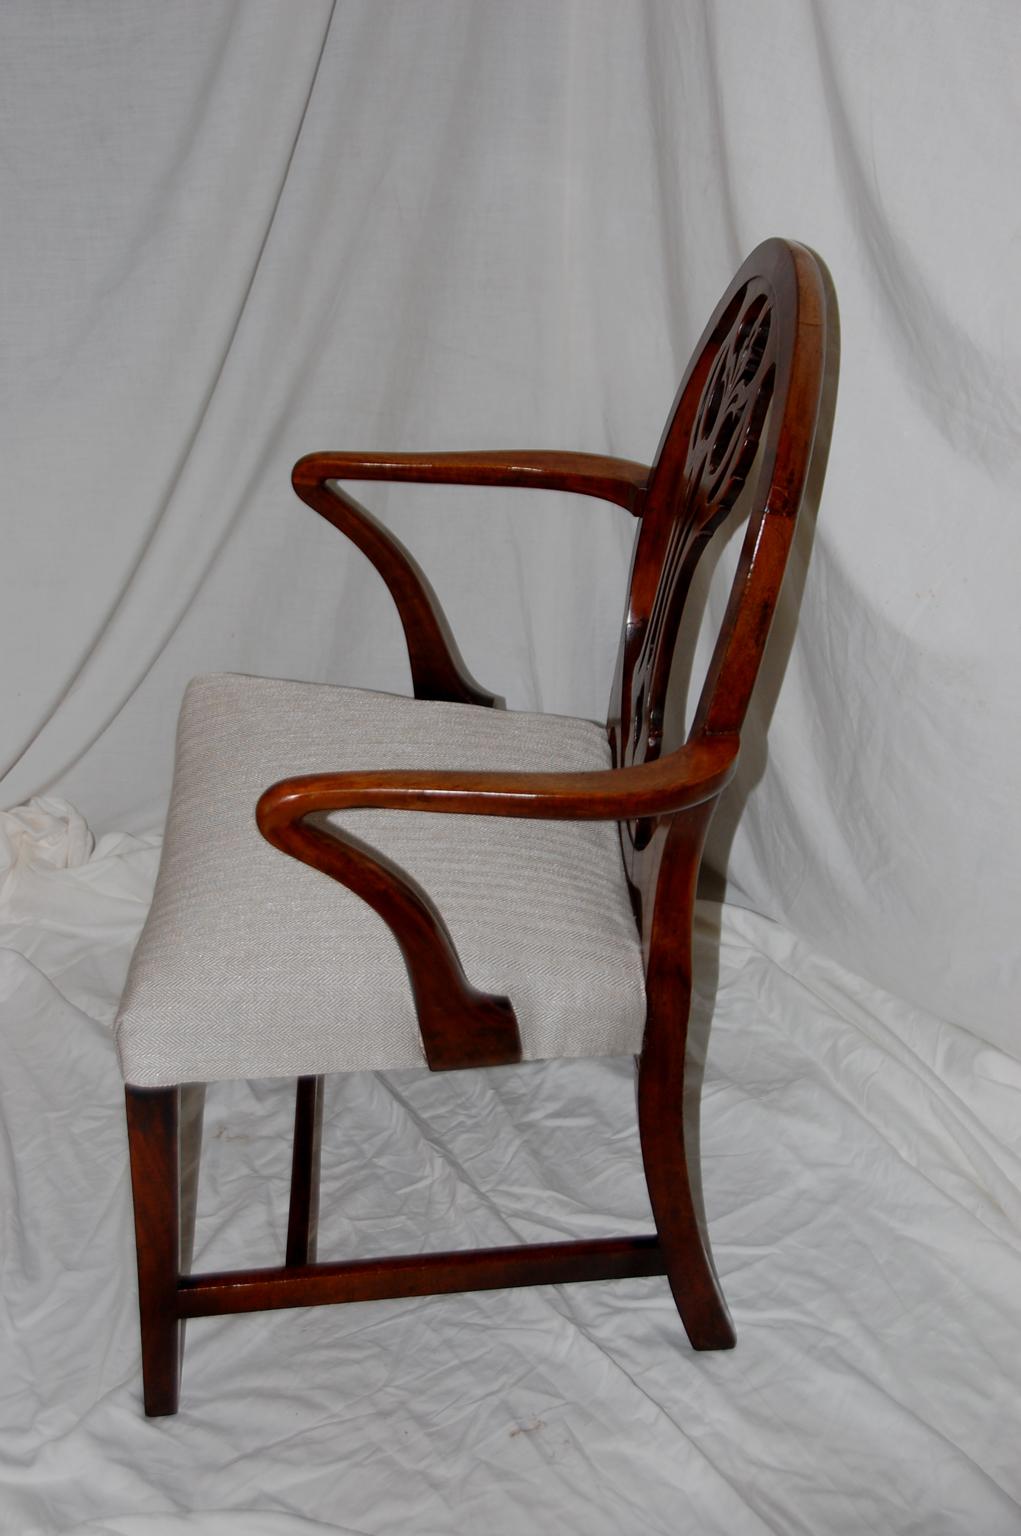 English Georgian Hepplewhite period mahogany armchair with carved splat within an oval back, shepherd's crook arms, tapered legs, saddle seat, circa 1790 $1,885.